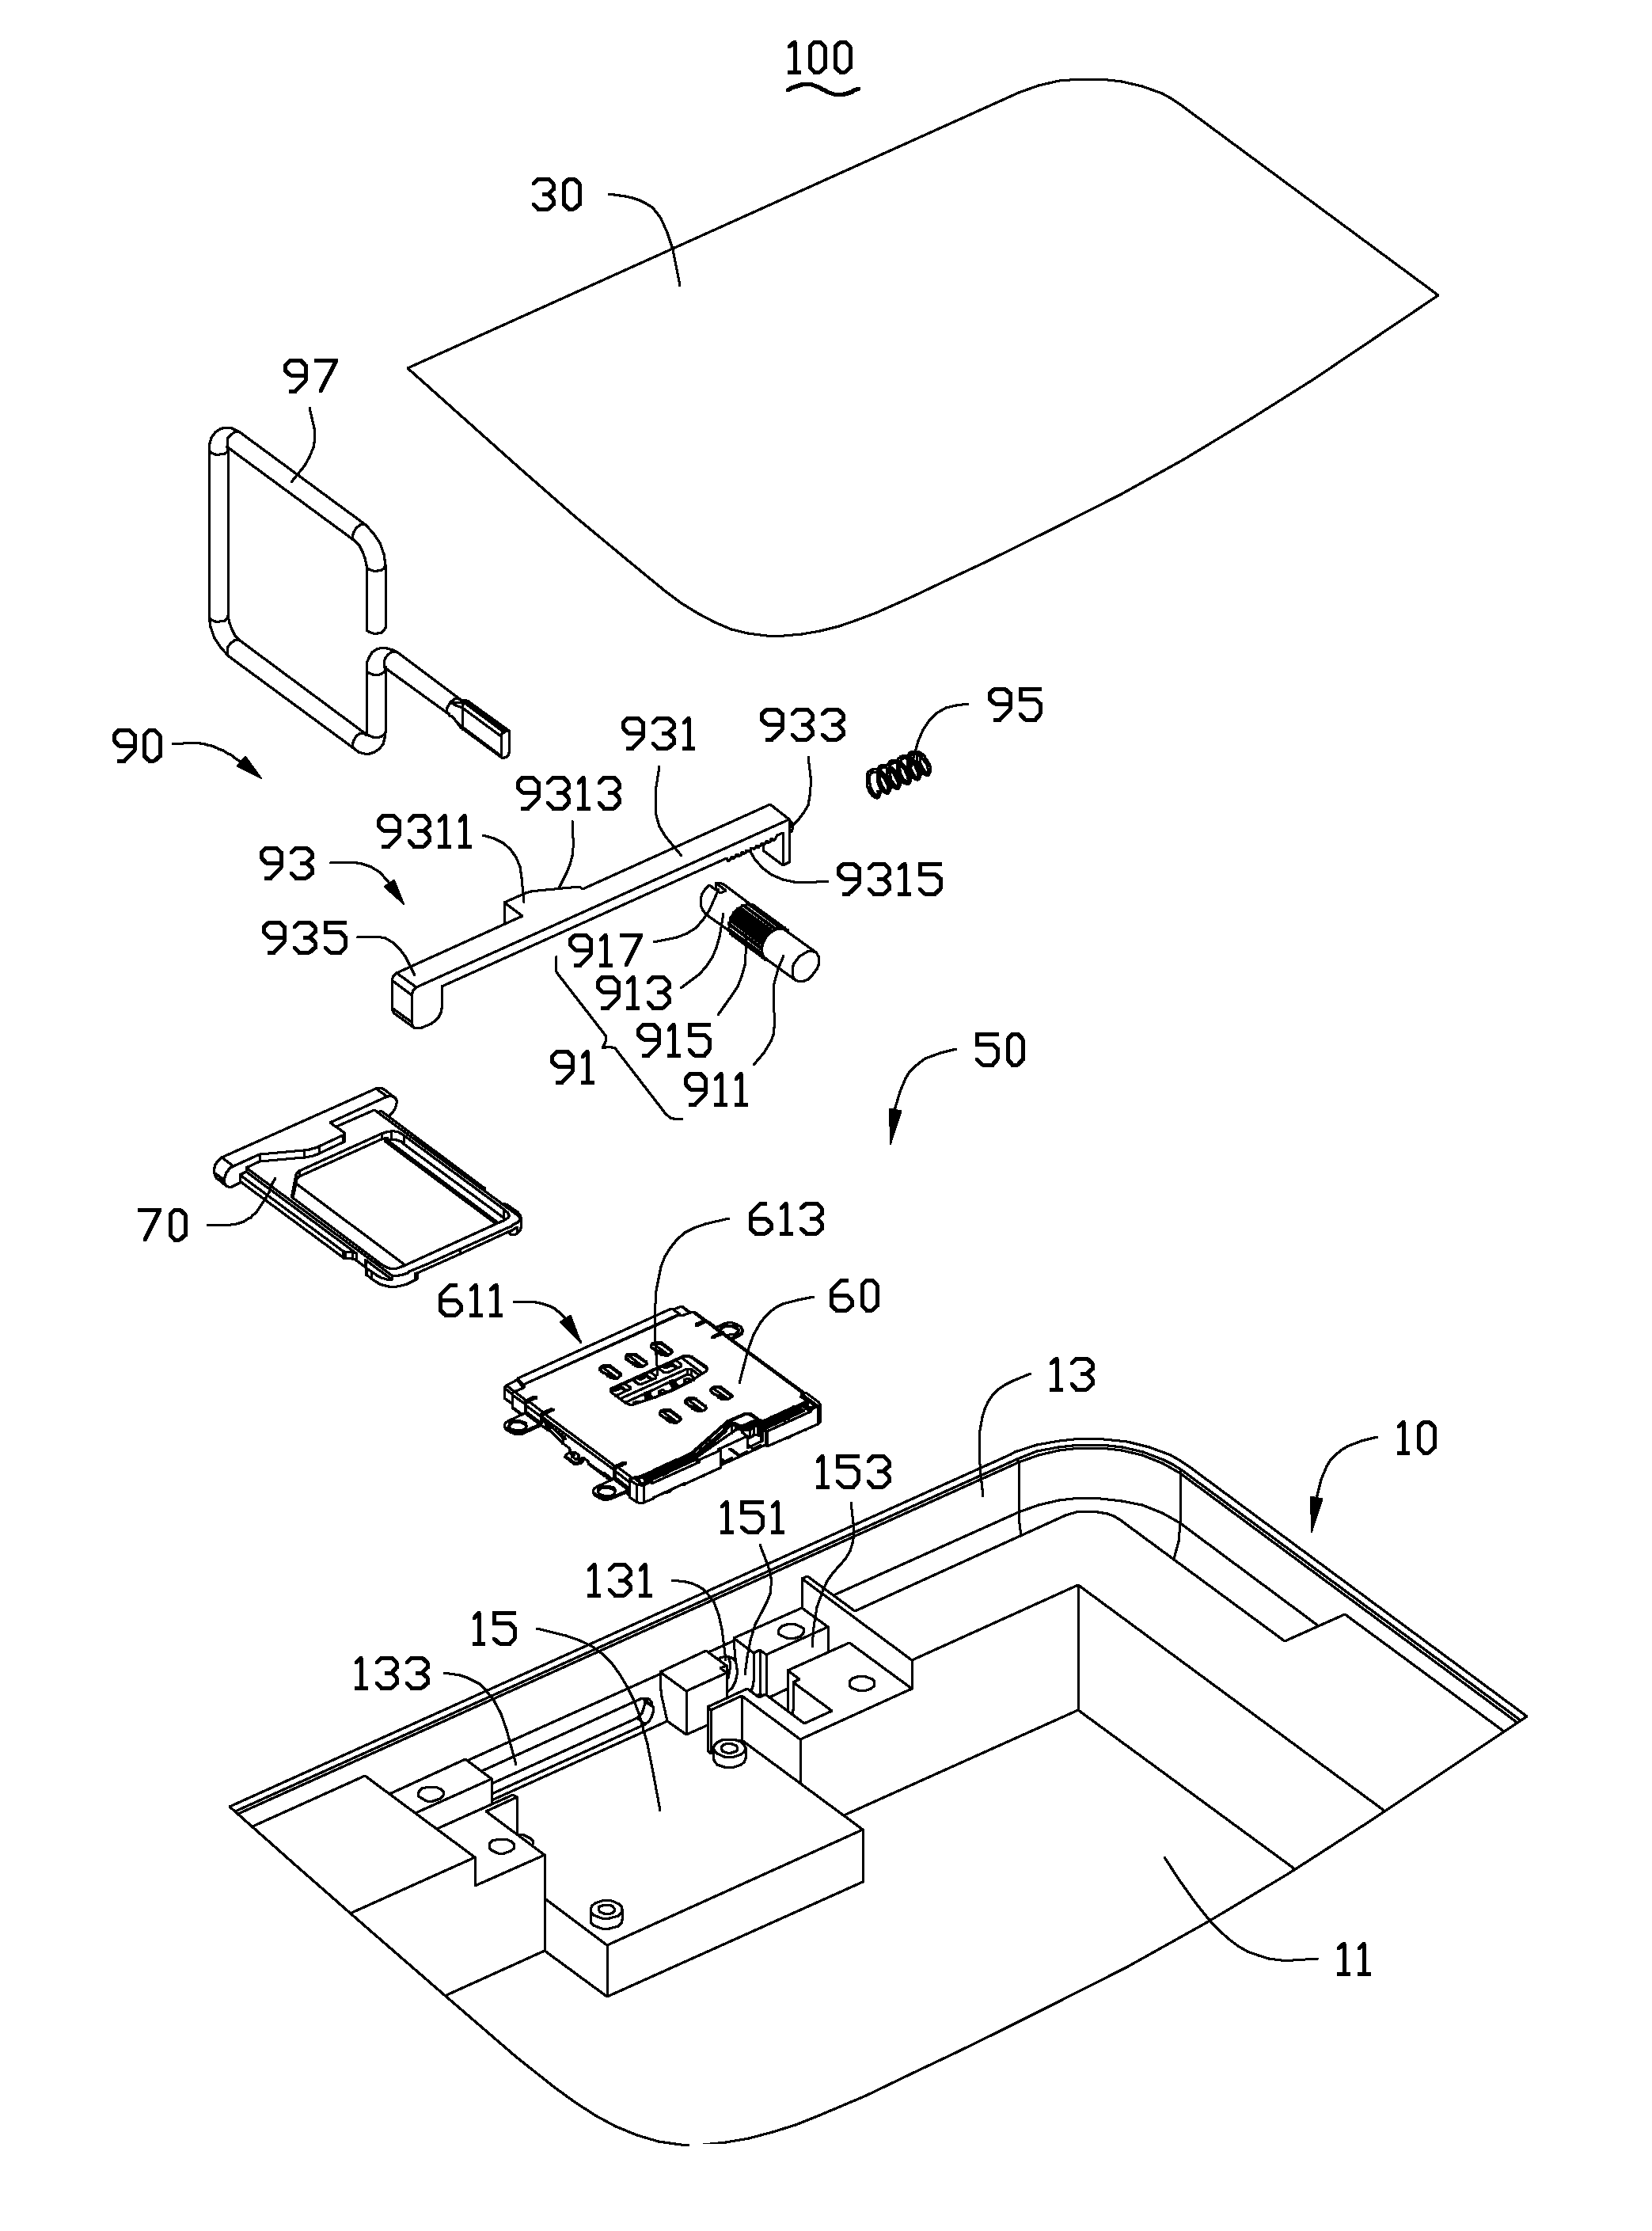 Chip card holding mechanism and portable electronic device using the same